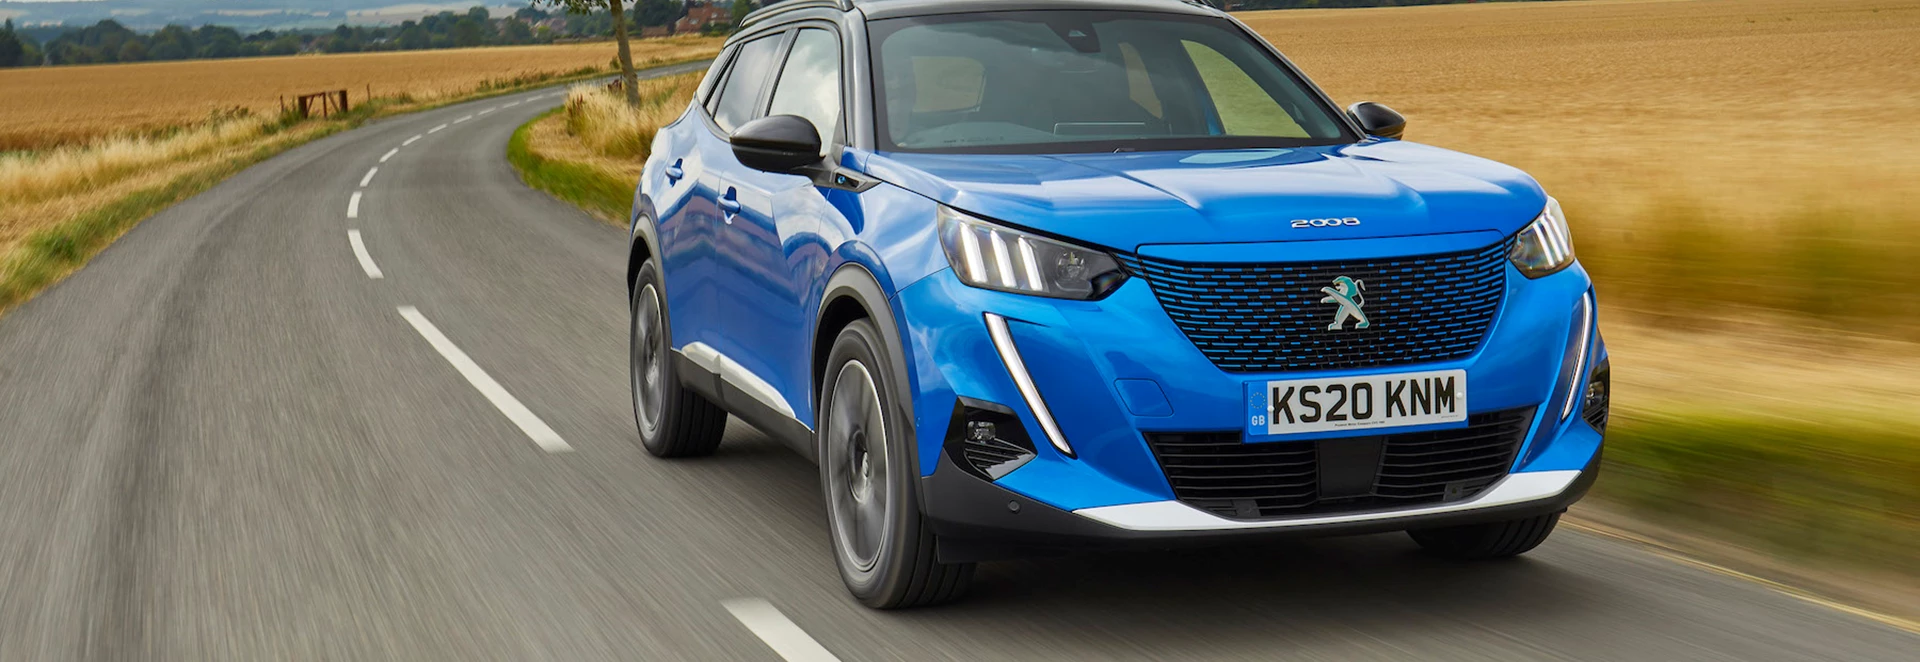 Buyer’s guide to the Peugeot 2008 